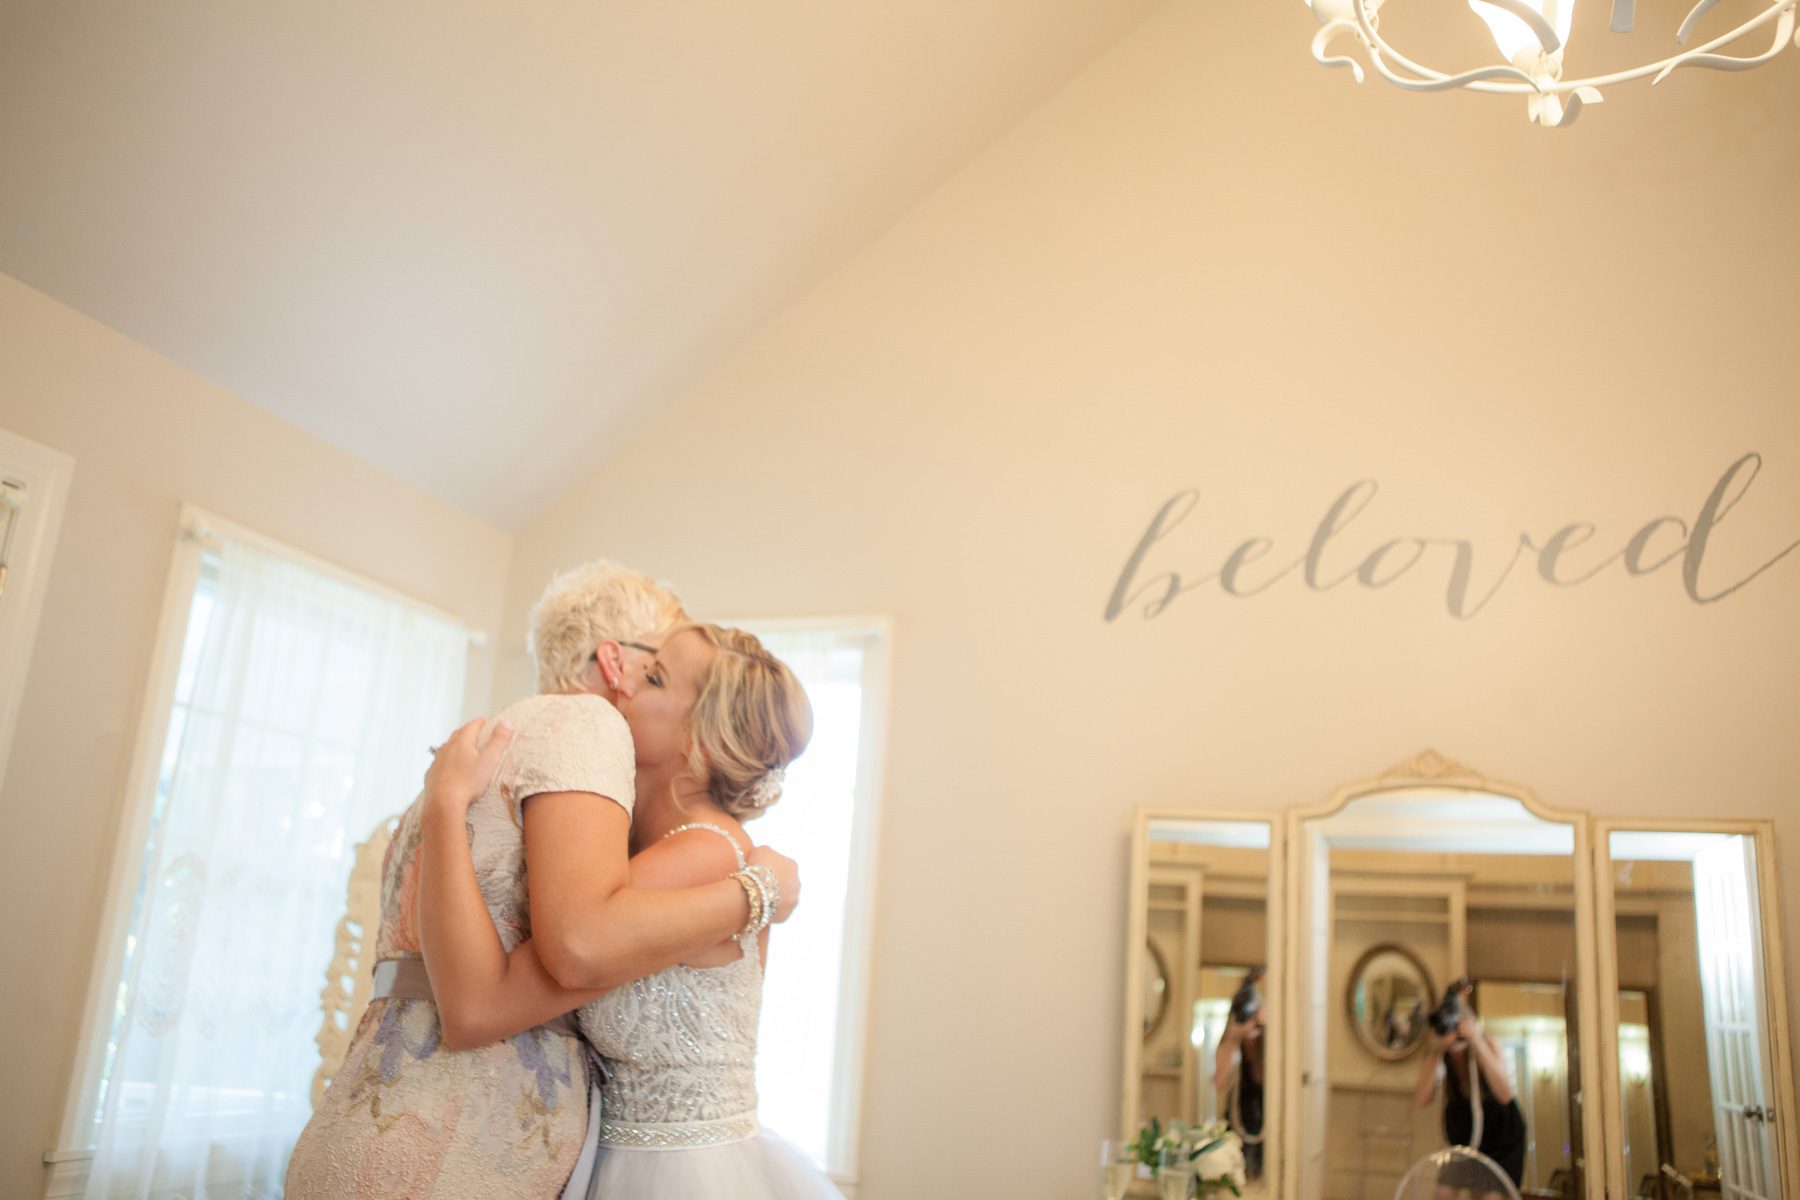 Hugs :) Wedding photography at Cedarwood Weddings and Estate in Nashville, TN photography by Krista Lee Photography